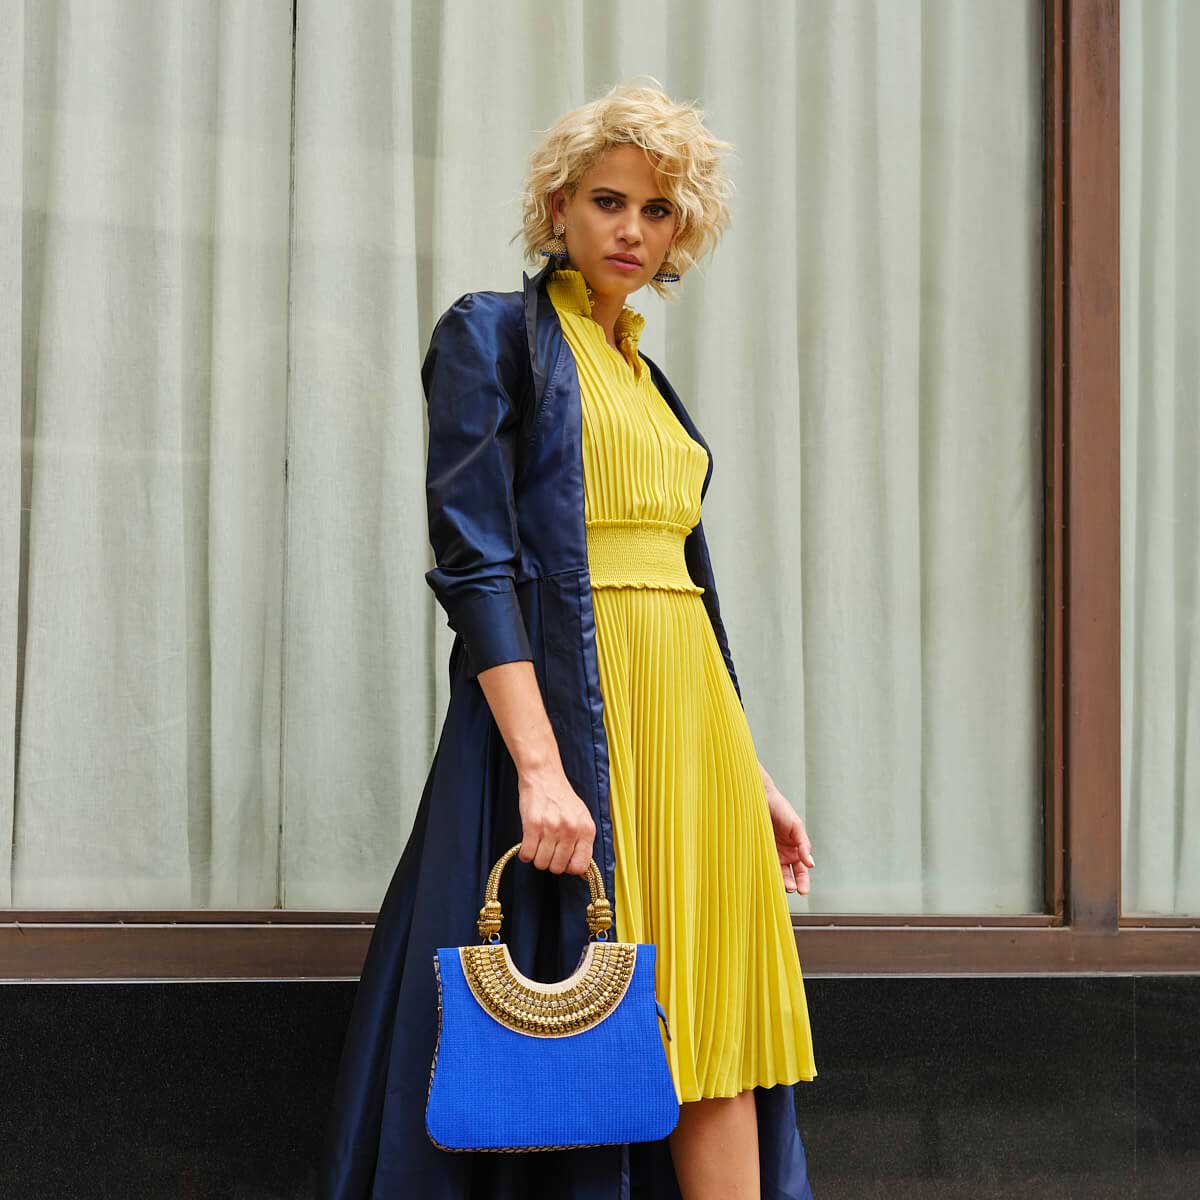 Suriya Mini tote blue and gold with ornate handles. As seen on ramp at NYFW 2021 and editorials. Model is carrying the big blue bag